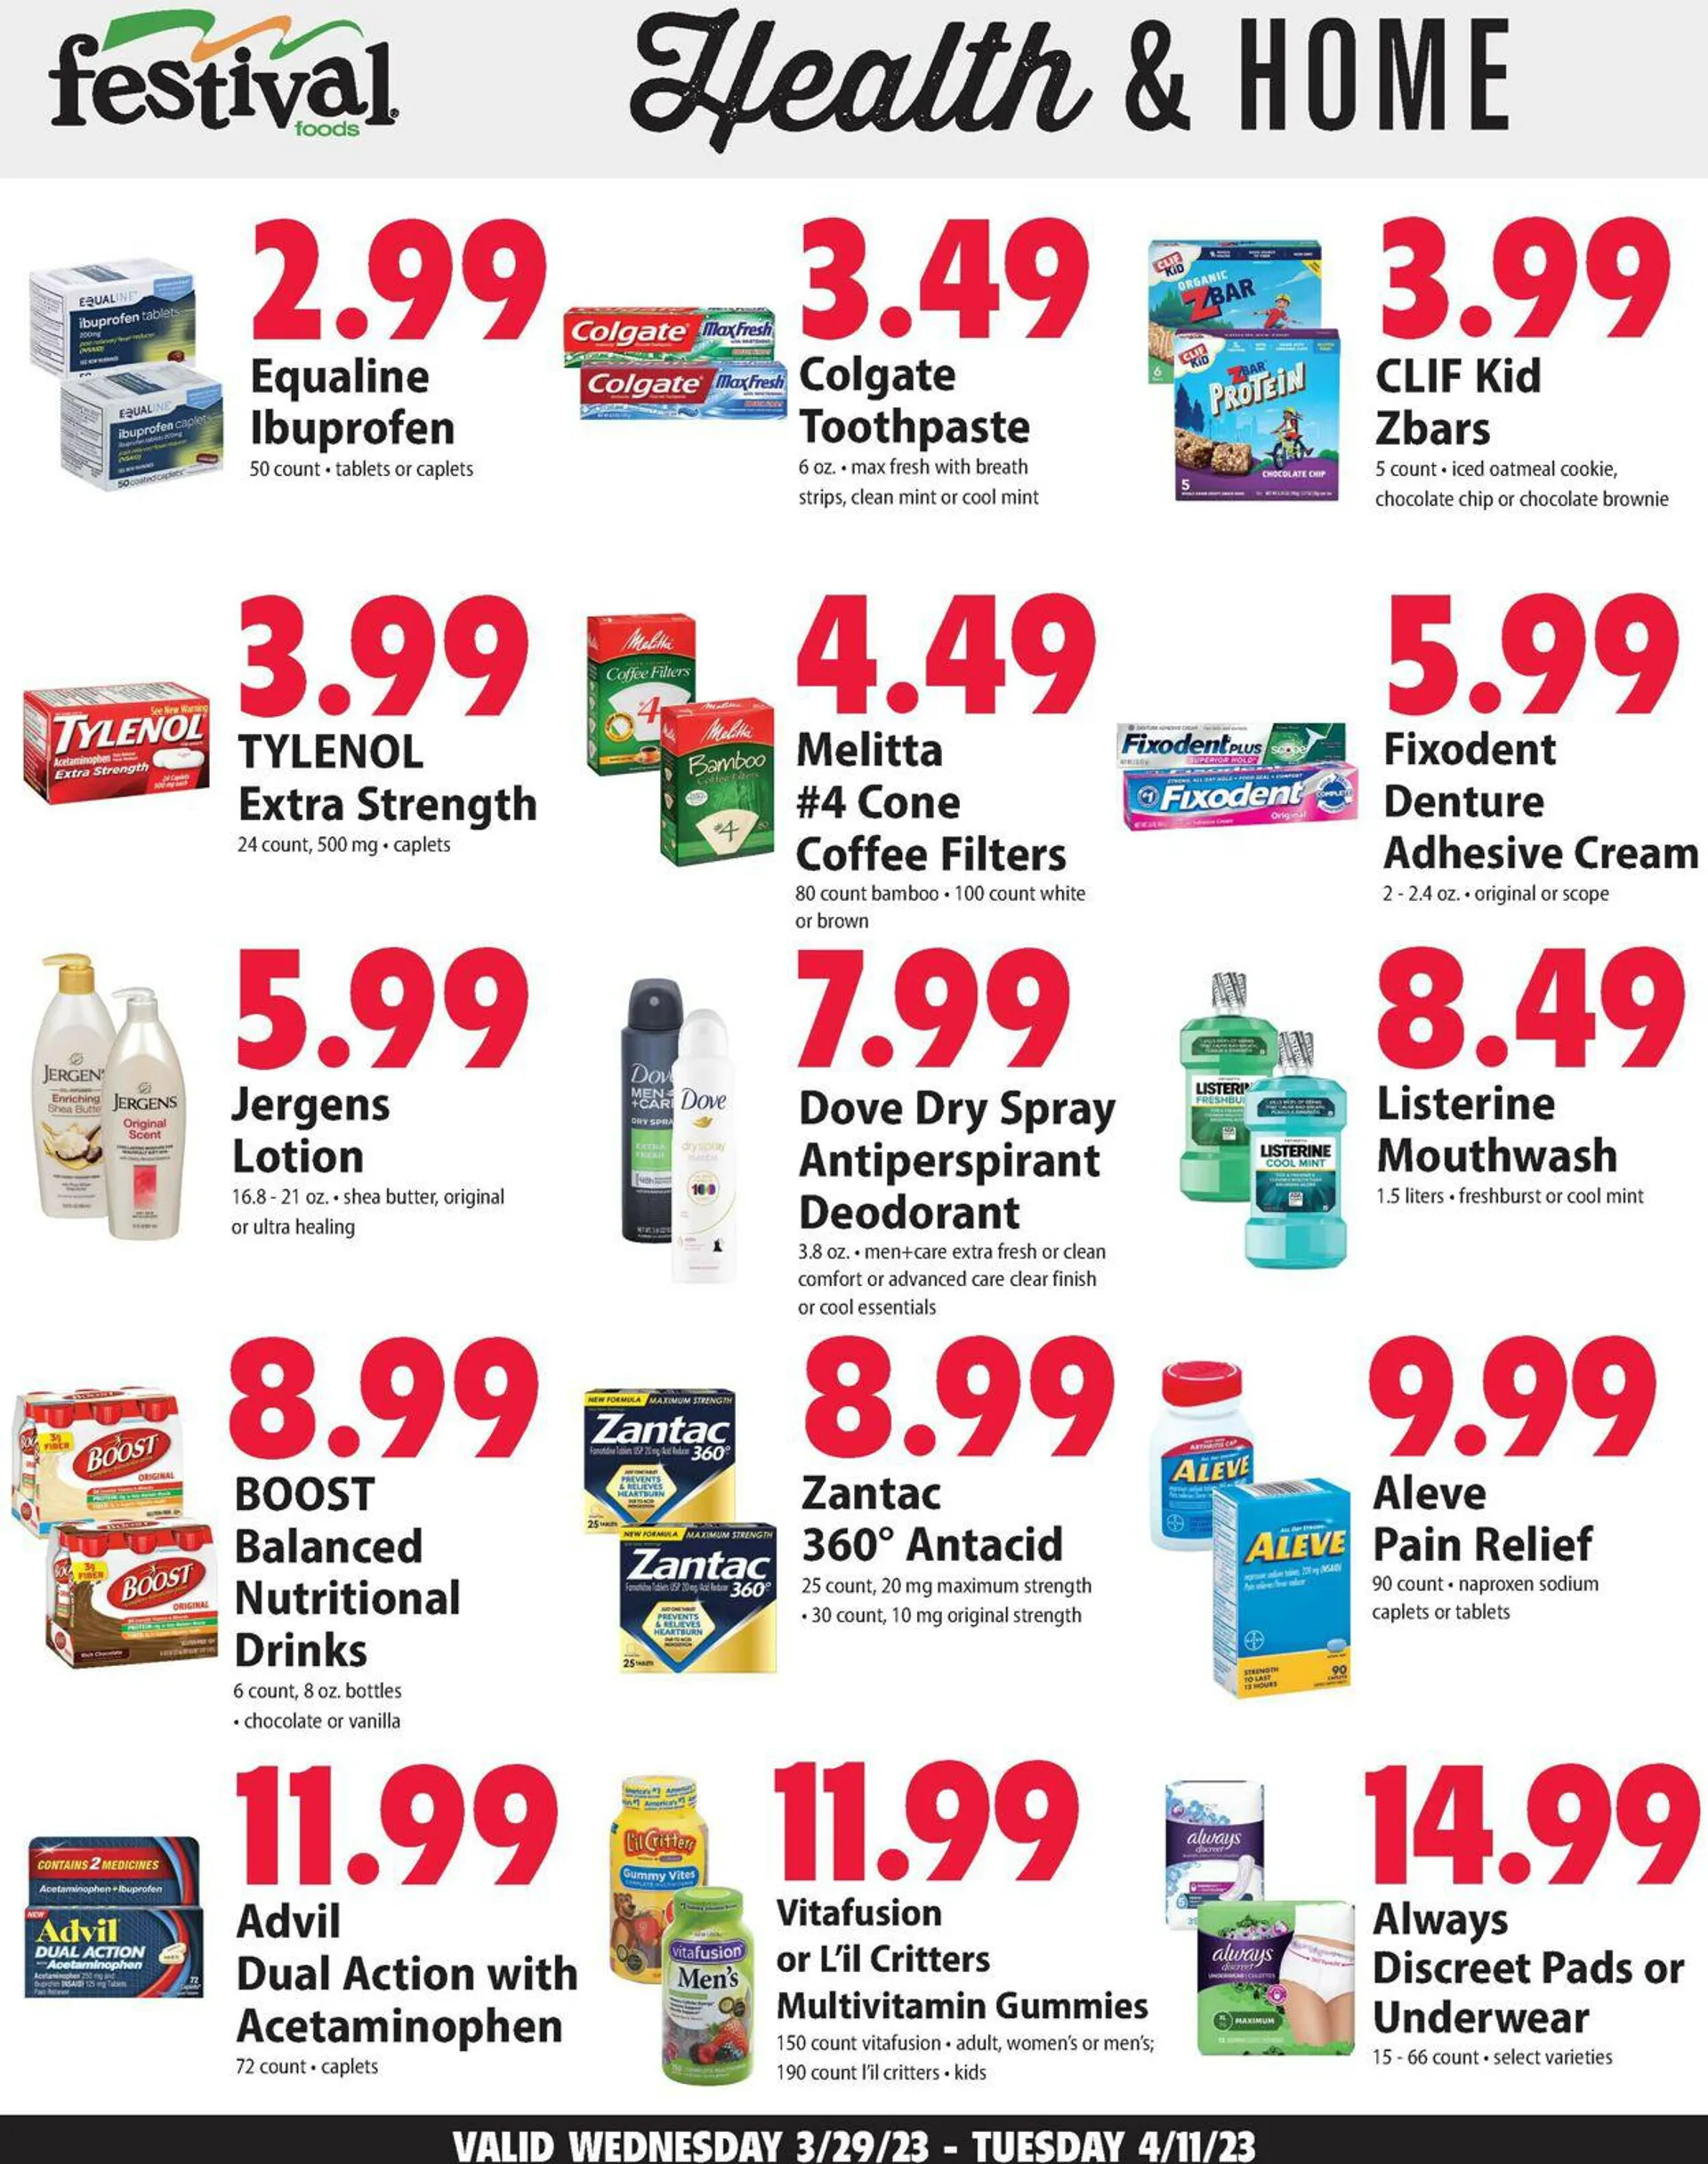 Festival Foods Current weekly ad - 7